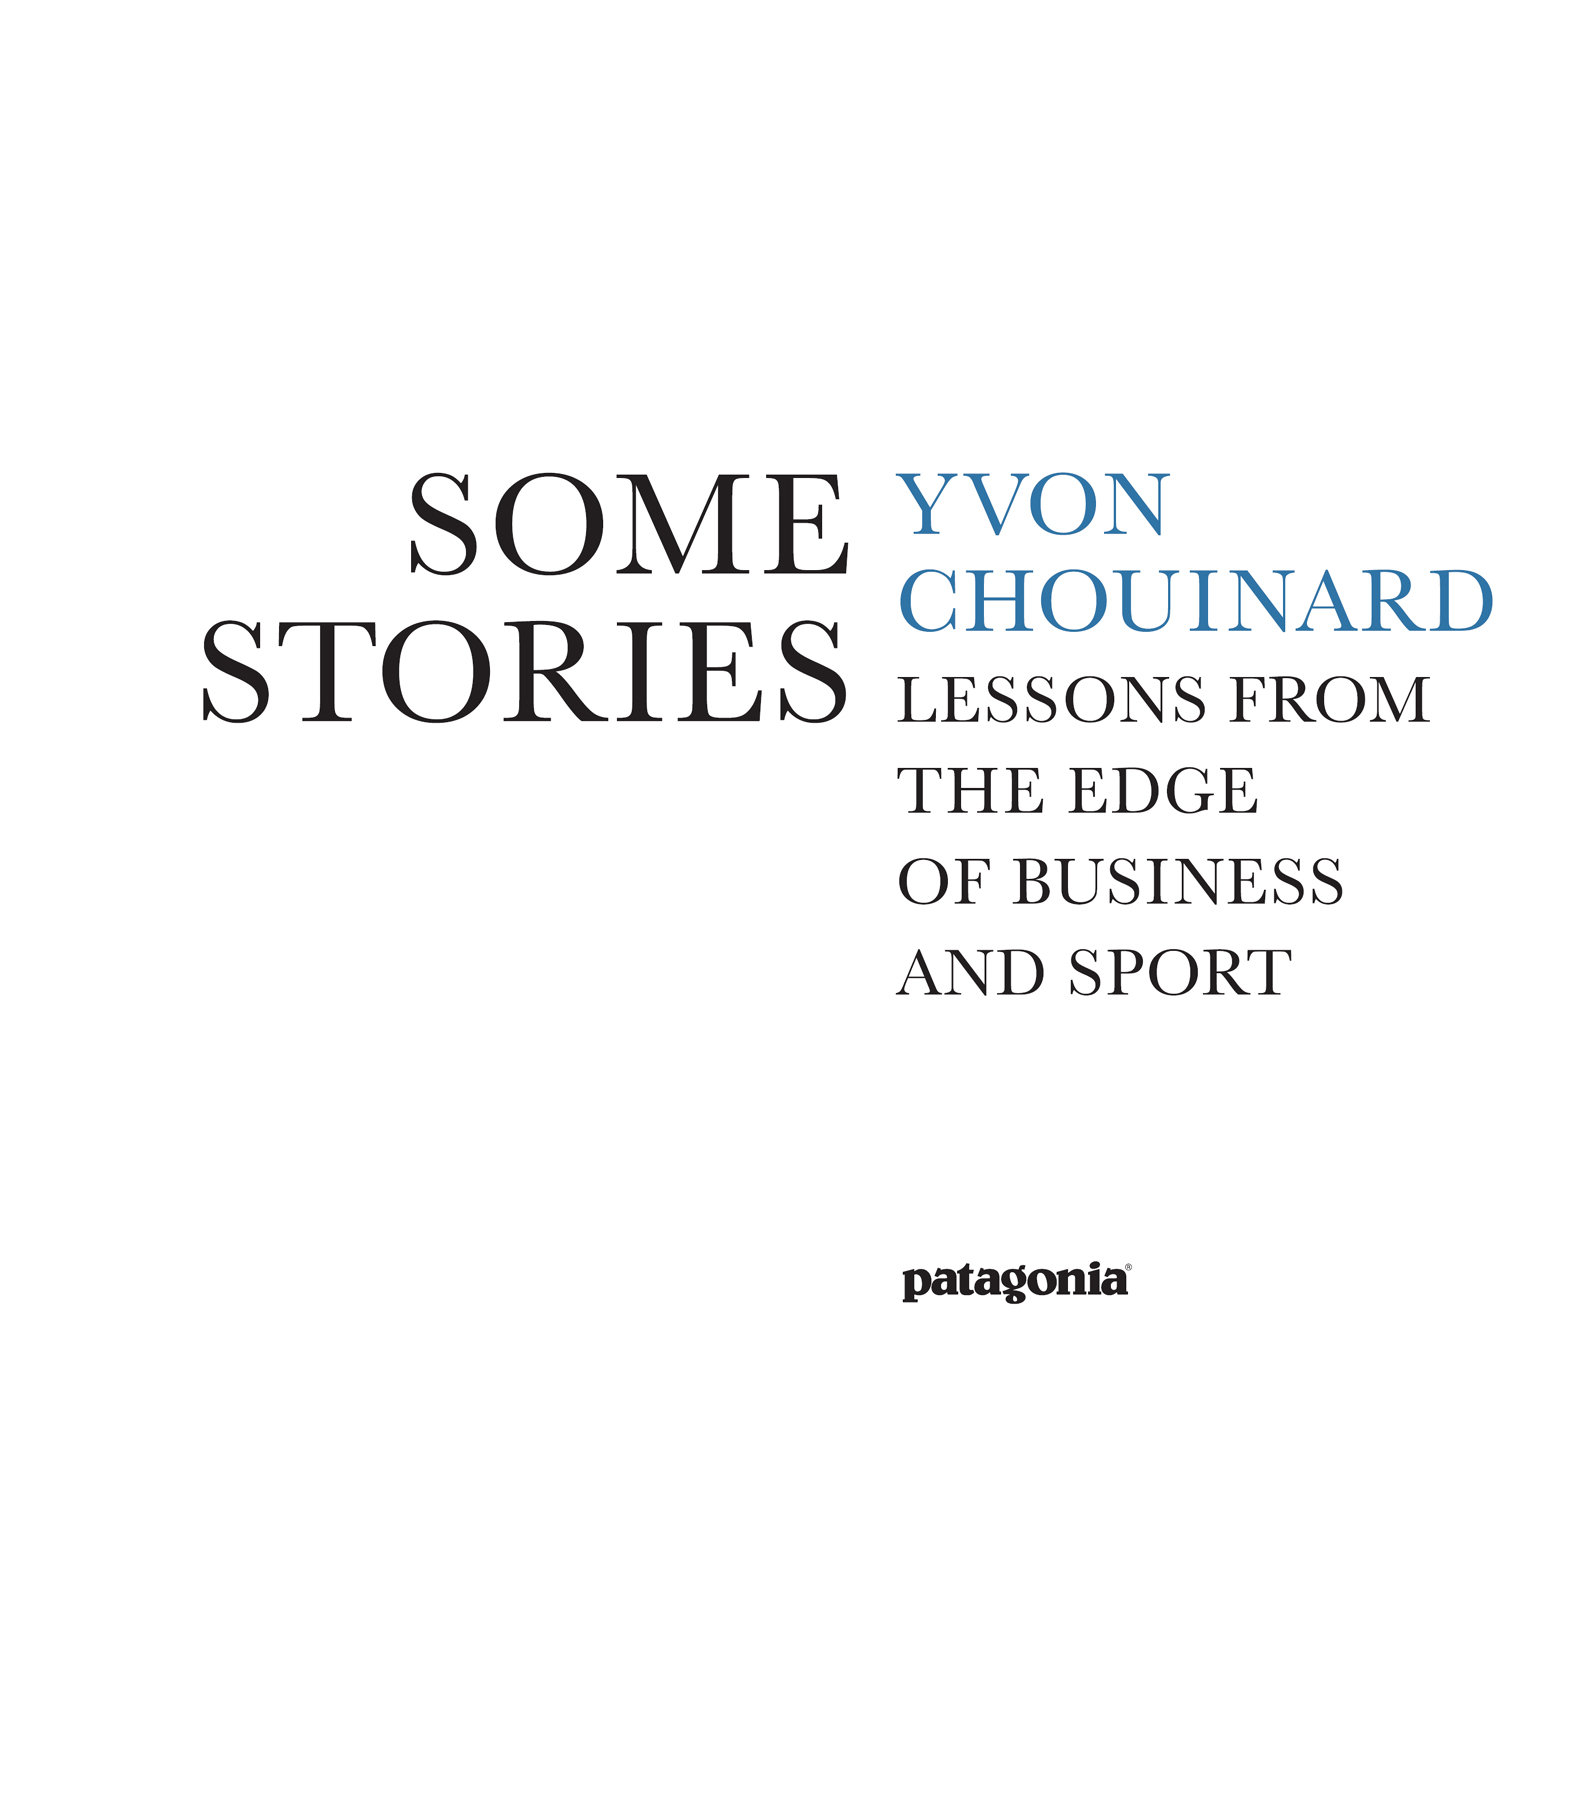 Yvon Chouinard Some Stories Lessons from the Edge of Business and Sport - photo 2